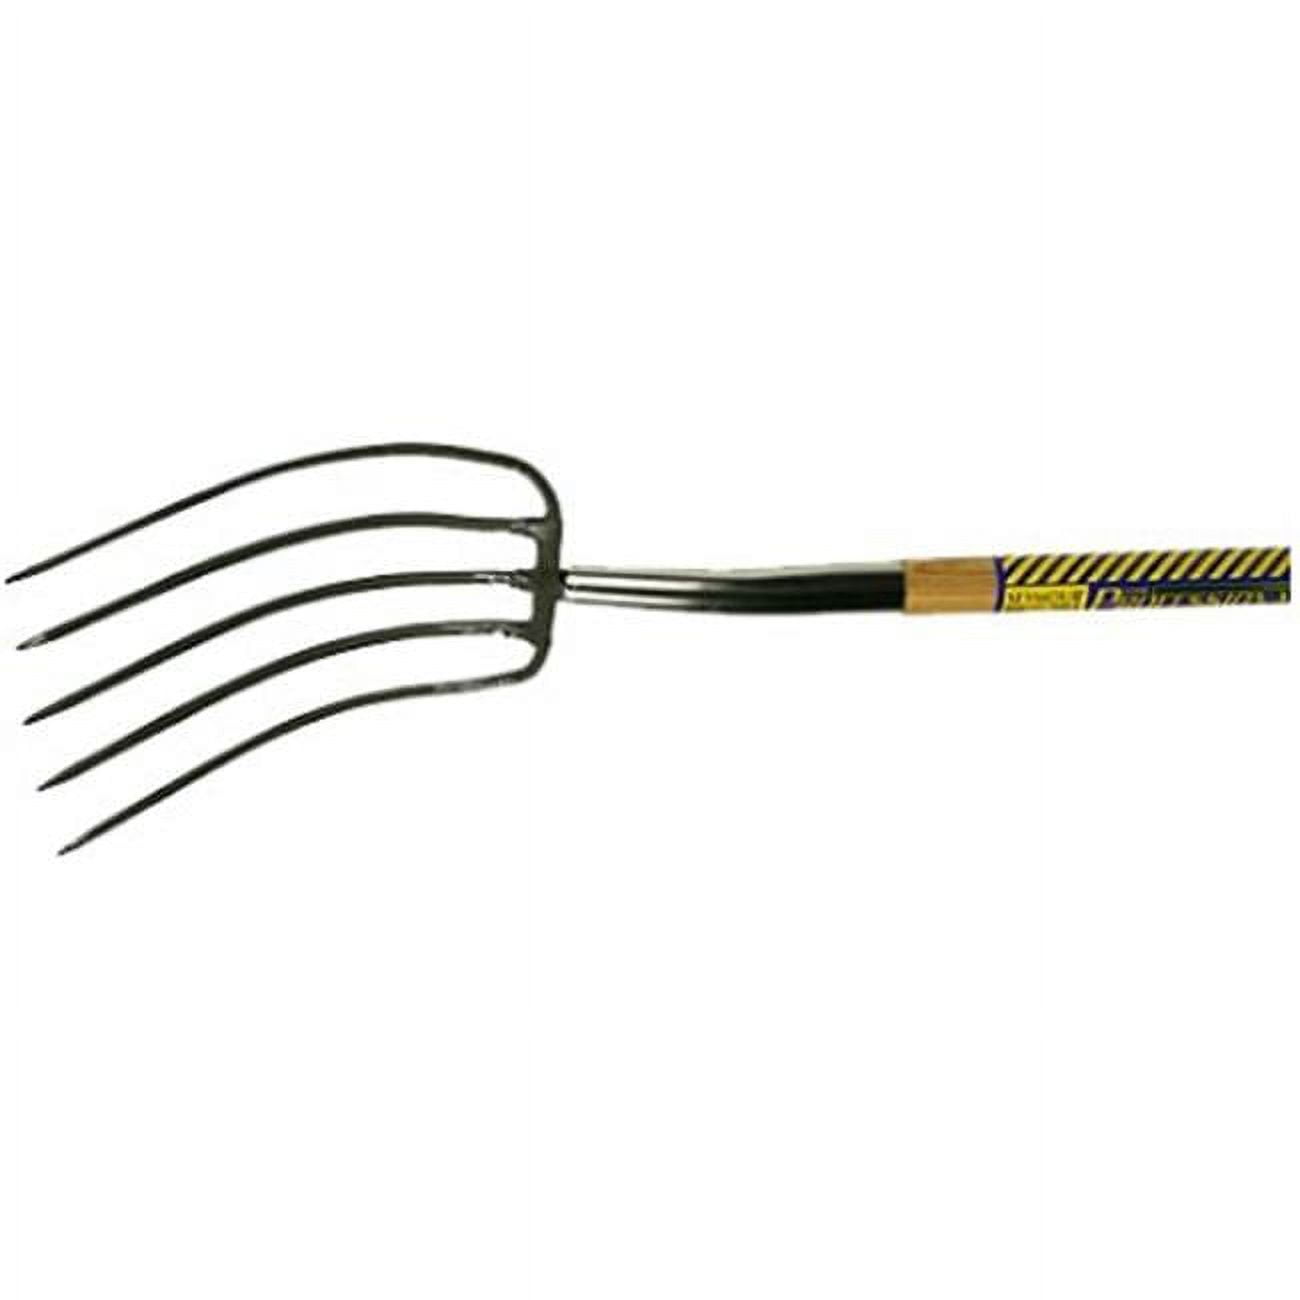 49276 5-tine Manure Fork With 48 In. Hardwood Handle